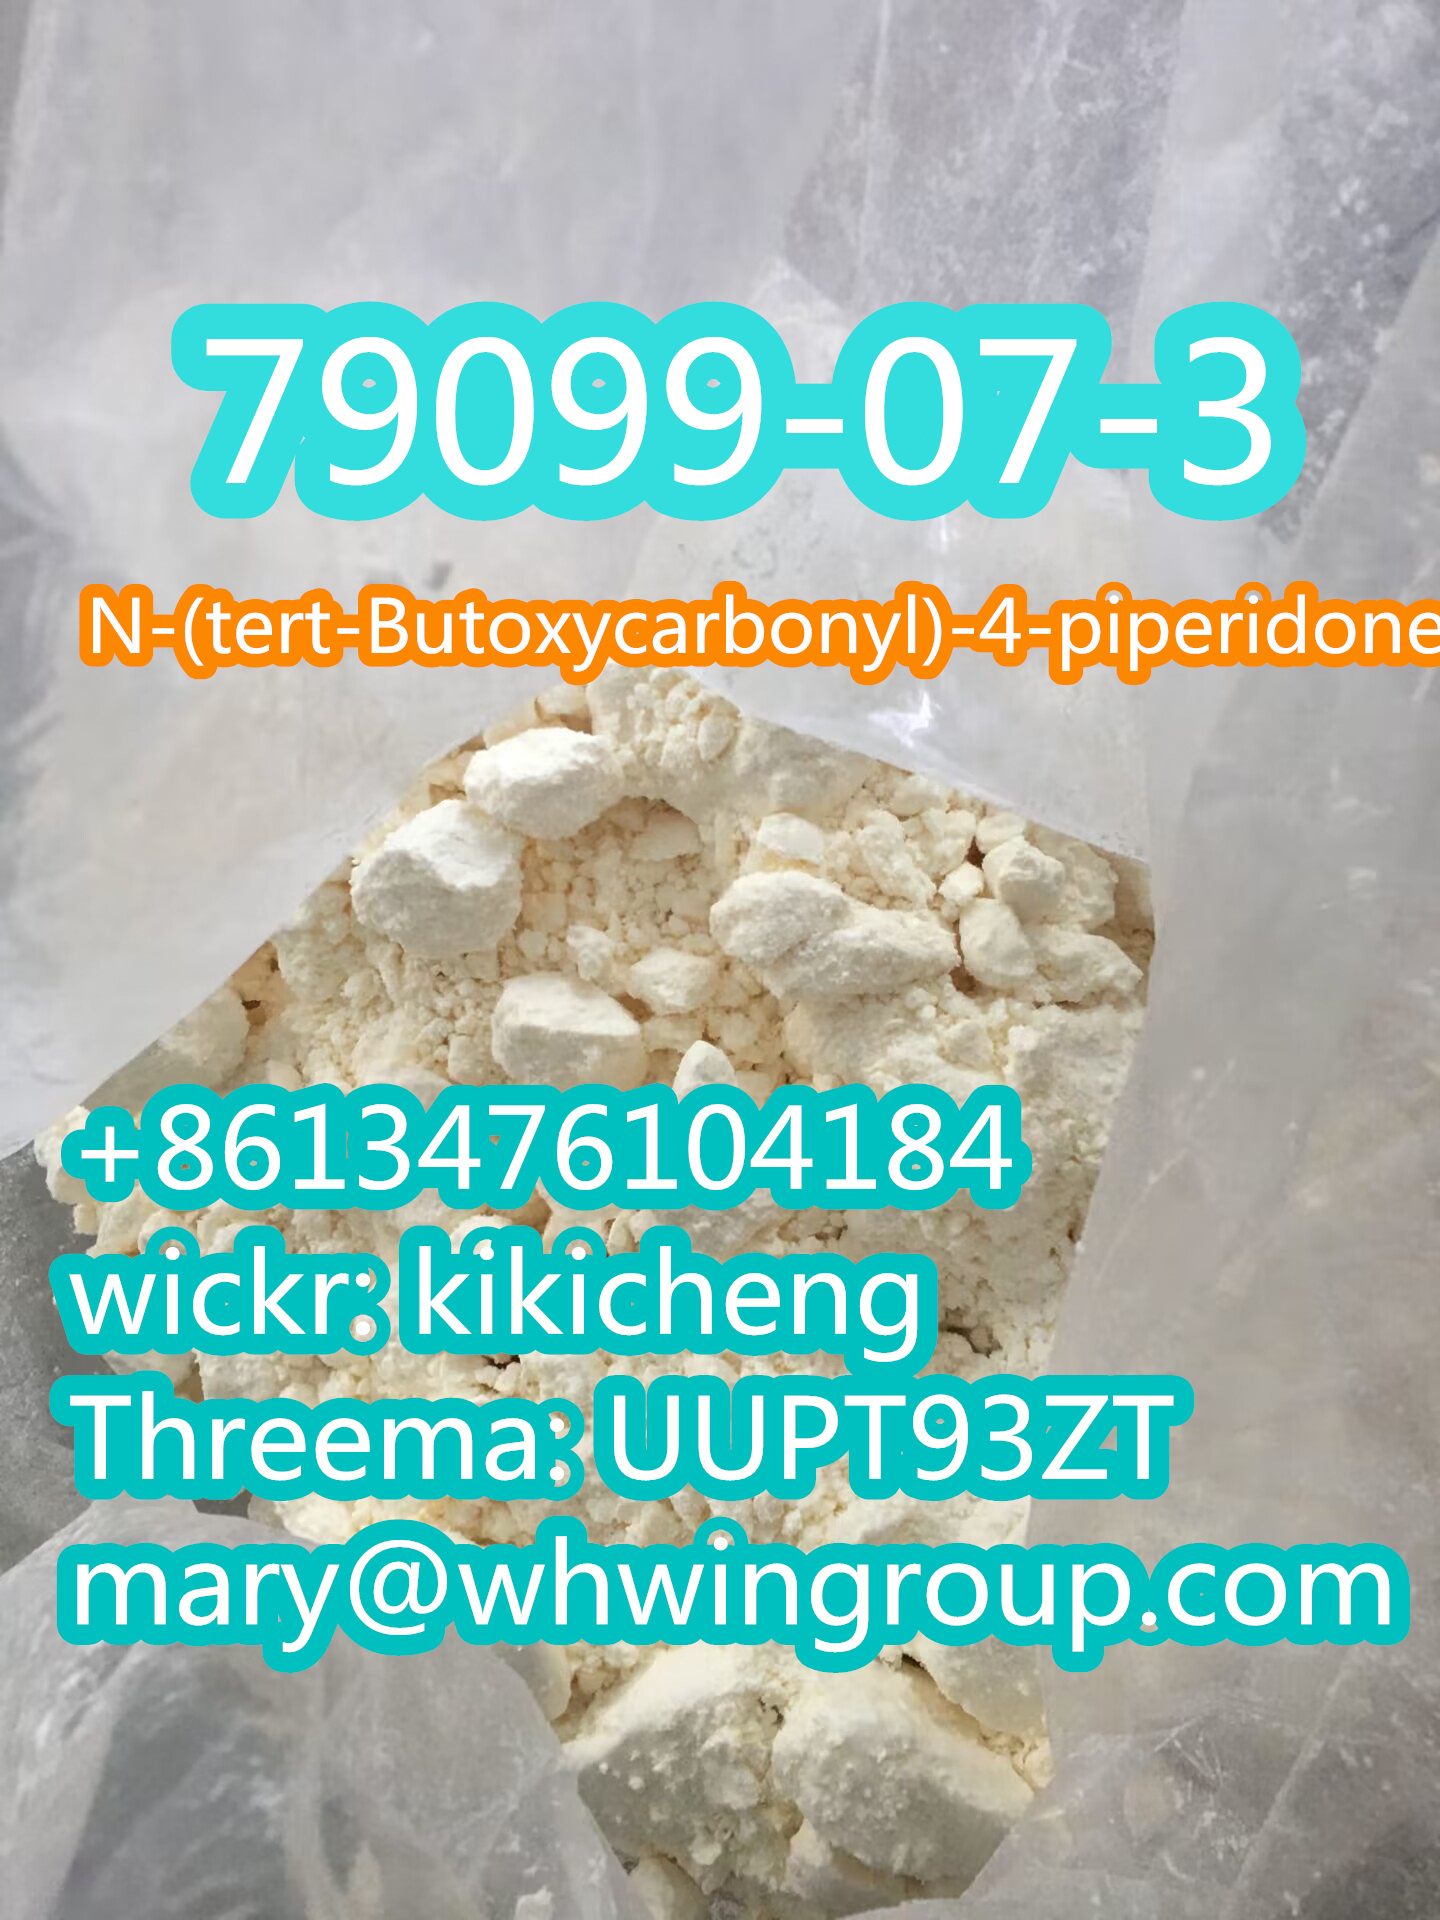 86-13476104184 N-(tert-Butoxycarbonyl)-4-piperidone cas 79099-07-3  รูปที่ 1